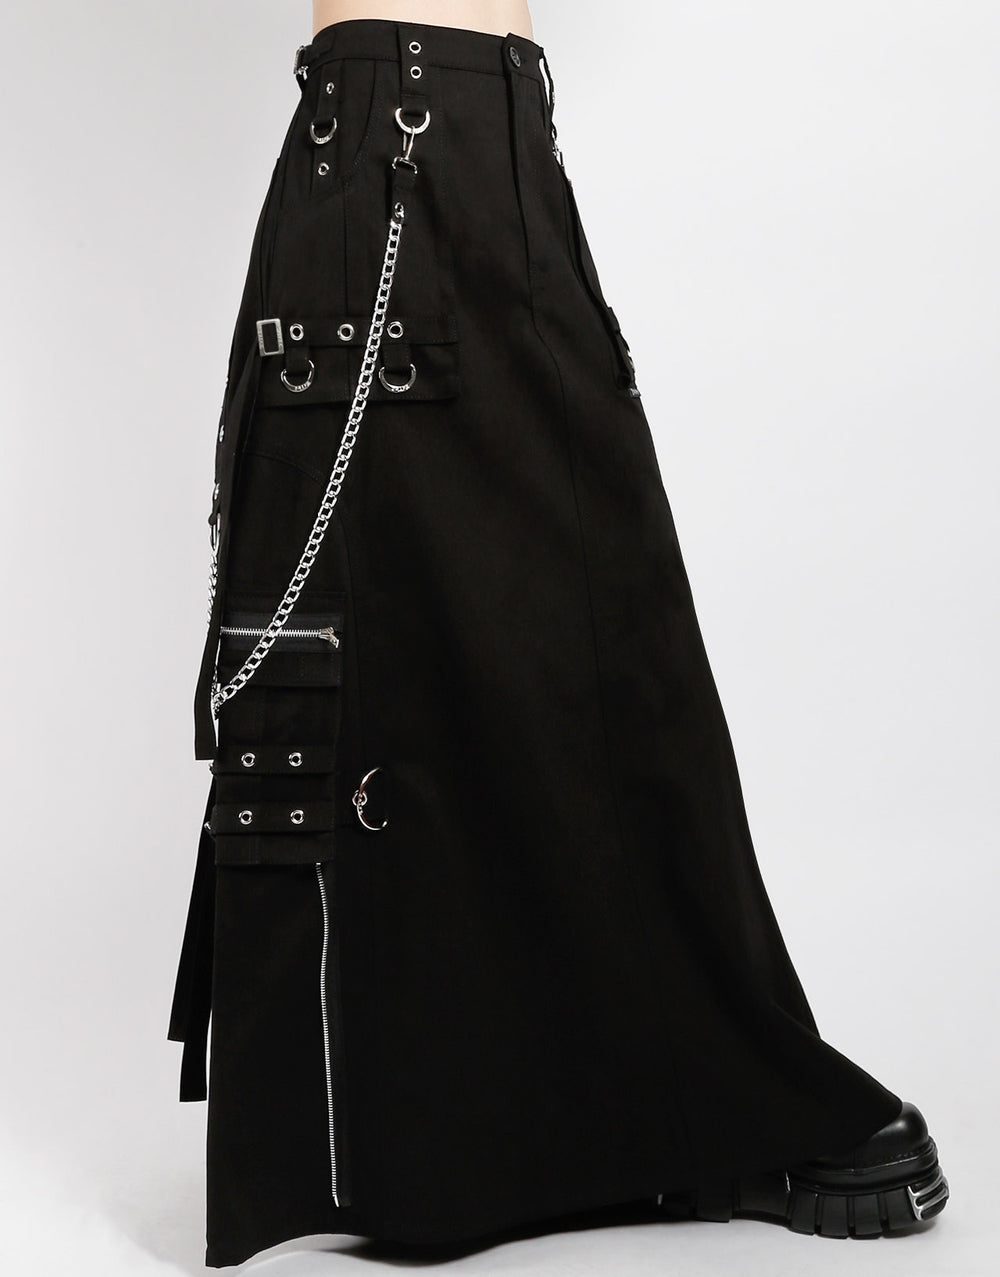 The front and right side of the Strength Maxi Kilt on model.